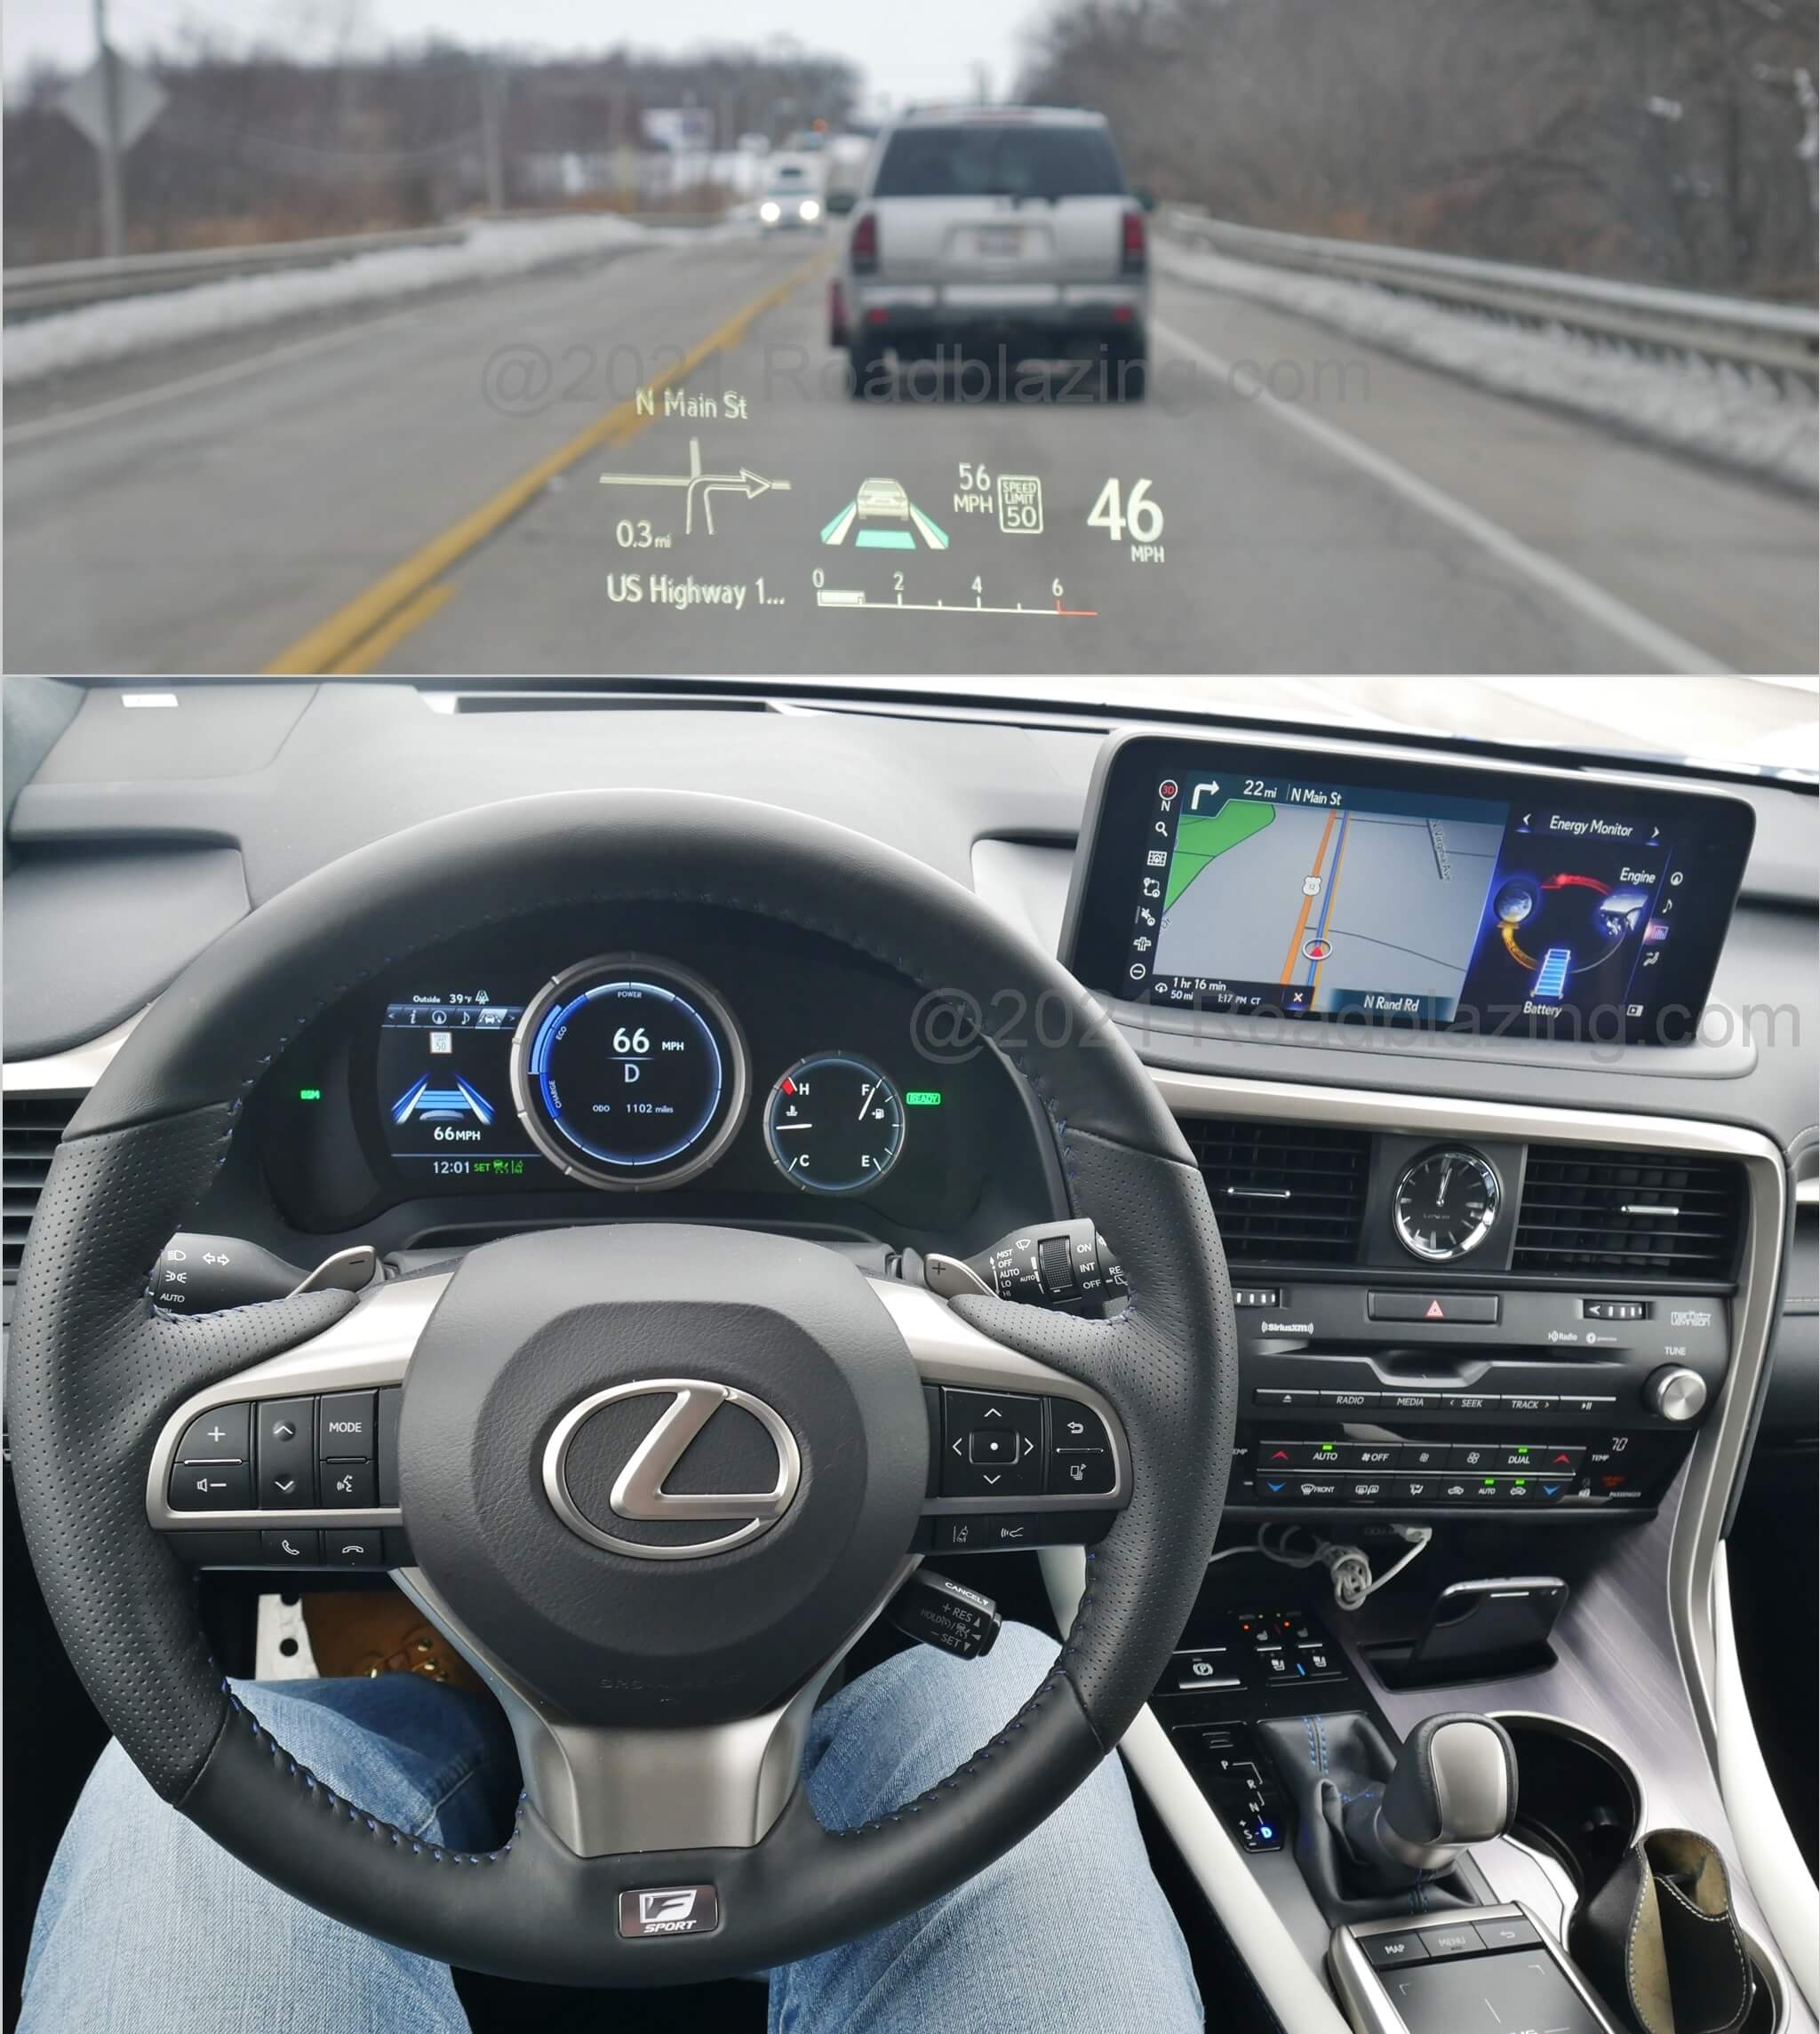 2021 Lexus 450h Hybrid AWD F-Sport: available HUD displays adaptive cruise control, lane keep assist, and native cloud navigation